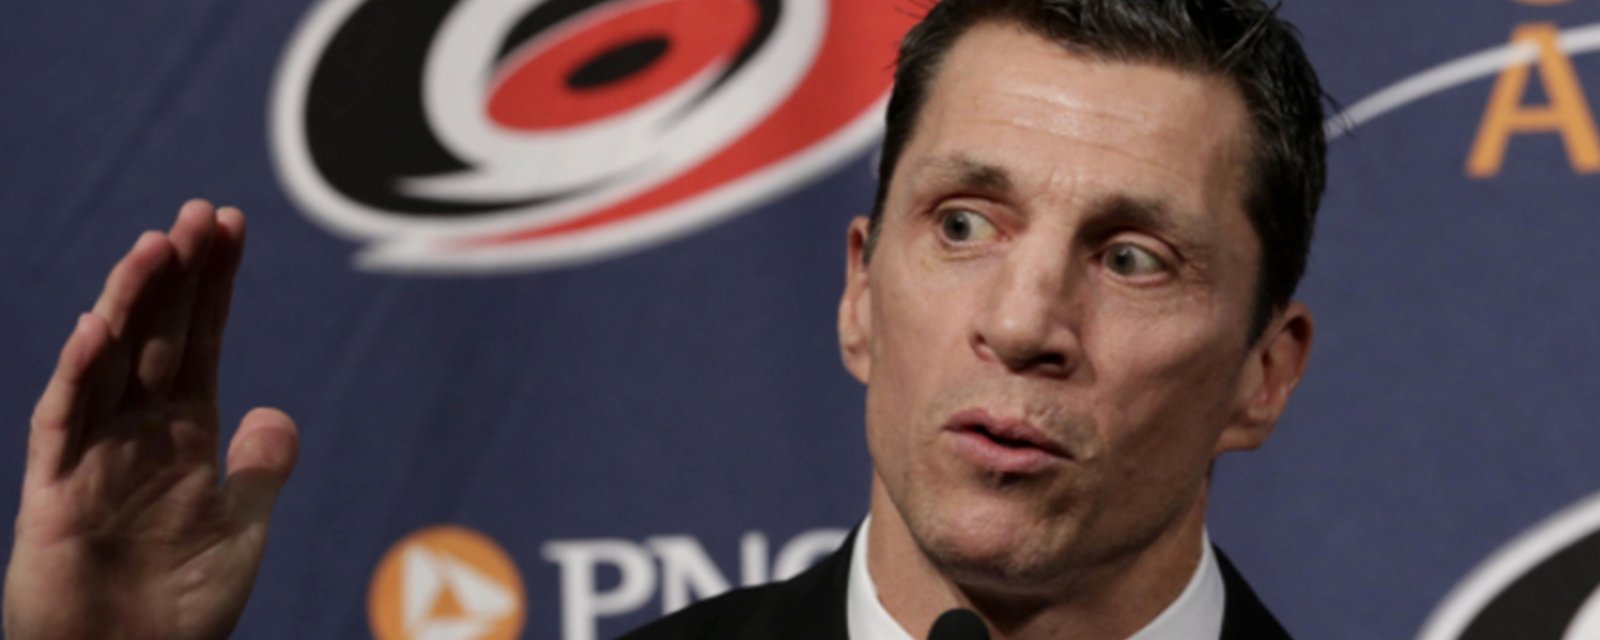 Brind’Amour calls the NHL “a joke”, says refereeing is “a crime scene”.